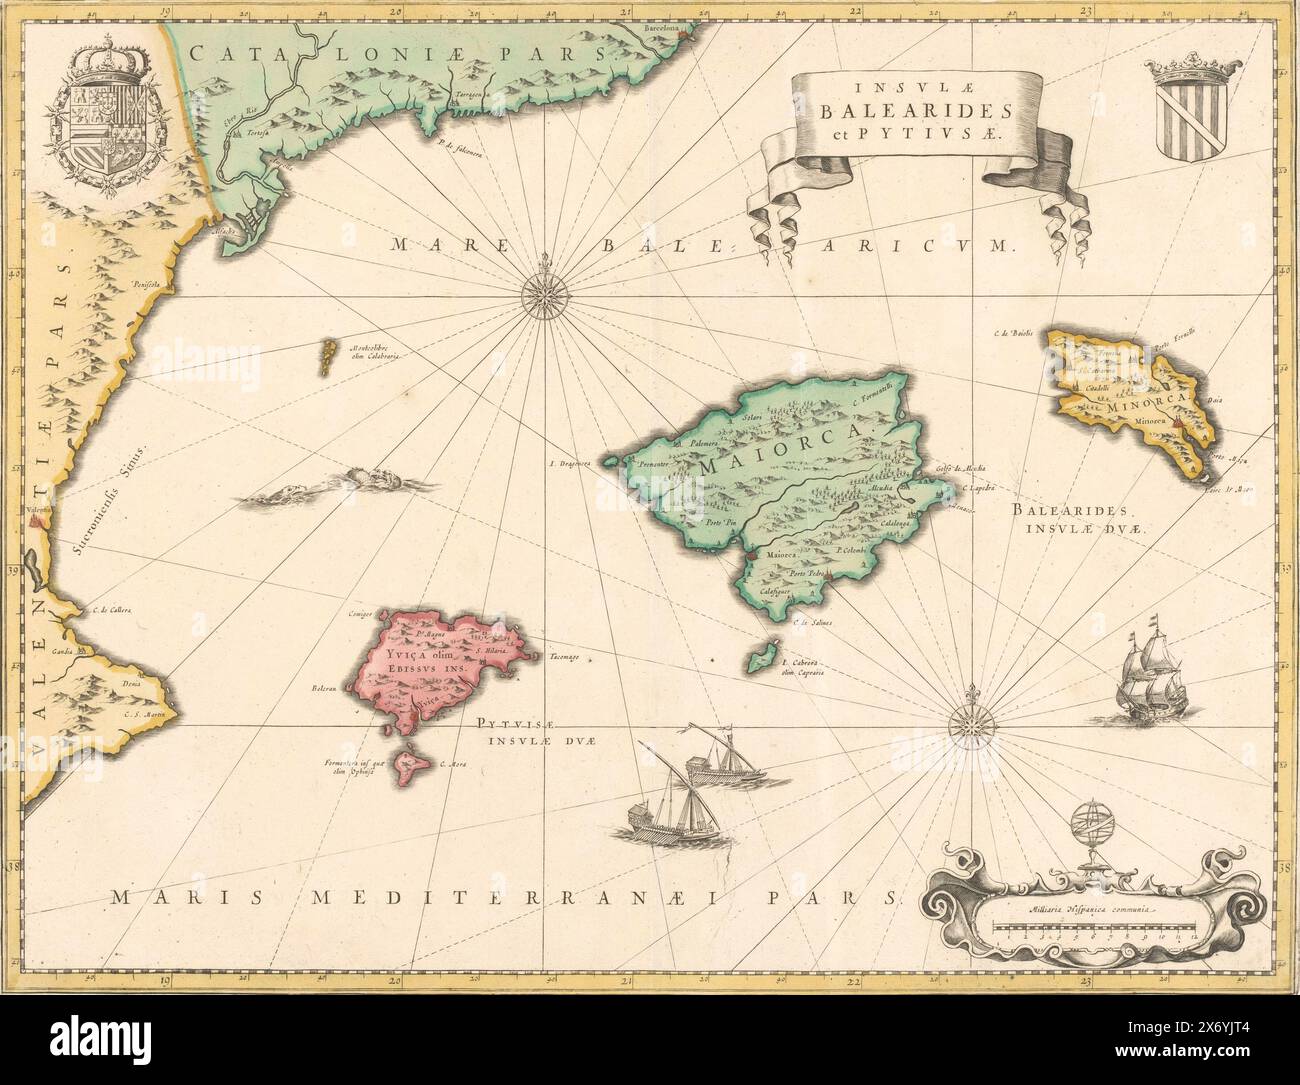 Map of the Balearic Islands and Pityus and coast of Spain, Map of the Balearic Islands and Pityus and part of the coast of Spain, outlined in yellow, areas colored, 2 compass roses: with reference to and r.r. Crowned coat of arms r.b., crowned coat of arms with golden fleece l.b.. Ships in the sea, r.r. scale in Spanish miles with a globe on top. Inscription; r.b.: INSVLAE, BALEARIDES, et PITYVSAE., publisher: Willem Janszoon Blaeu, publisher: Johannes Willemszoon Blaeu, Amsterdam, 1600 - 1650, paper, engraving, height, 37.9 cm × width, 49.2 cm Stock Photo